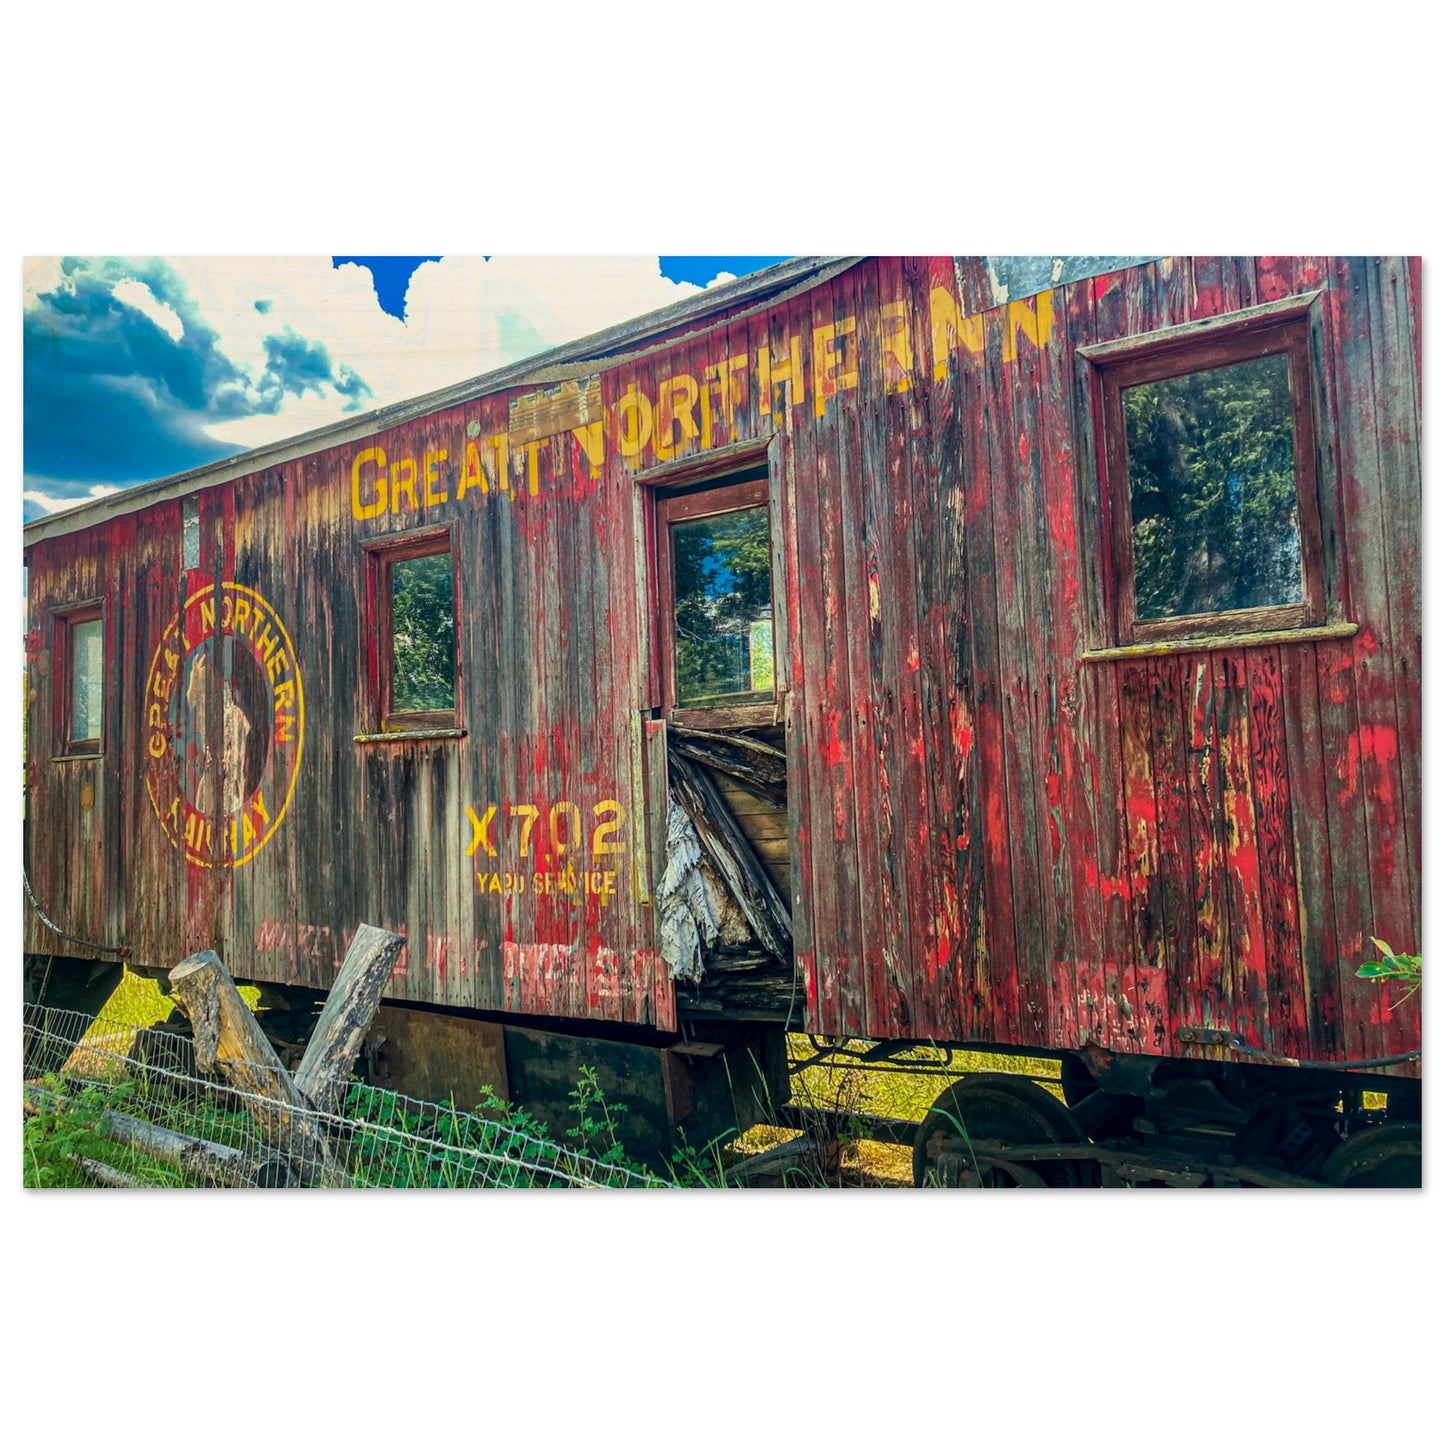 Abandoned Great Northern Pacific Railroad Car; Ghost Town, Montana Wood Print Communitea Books, Online Bookstore, Blog, & Gallery James Bonner